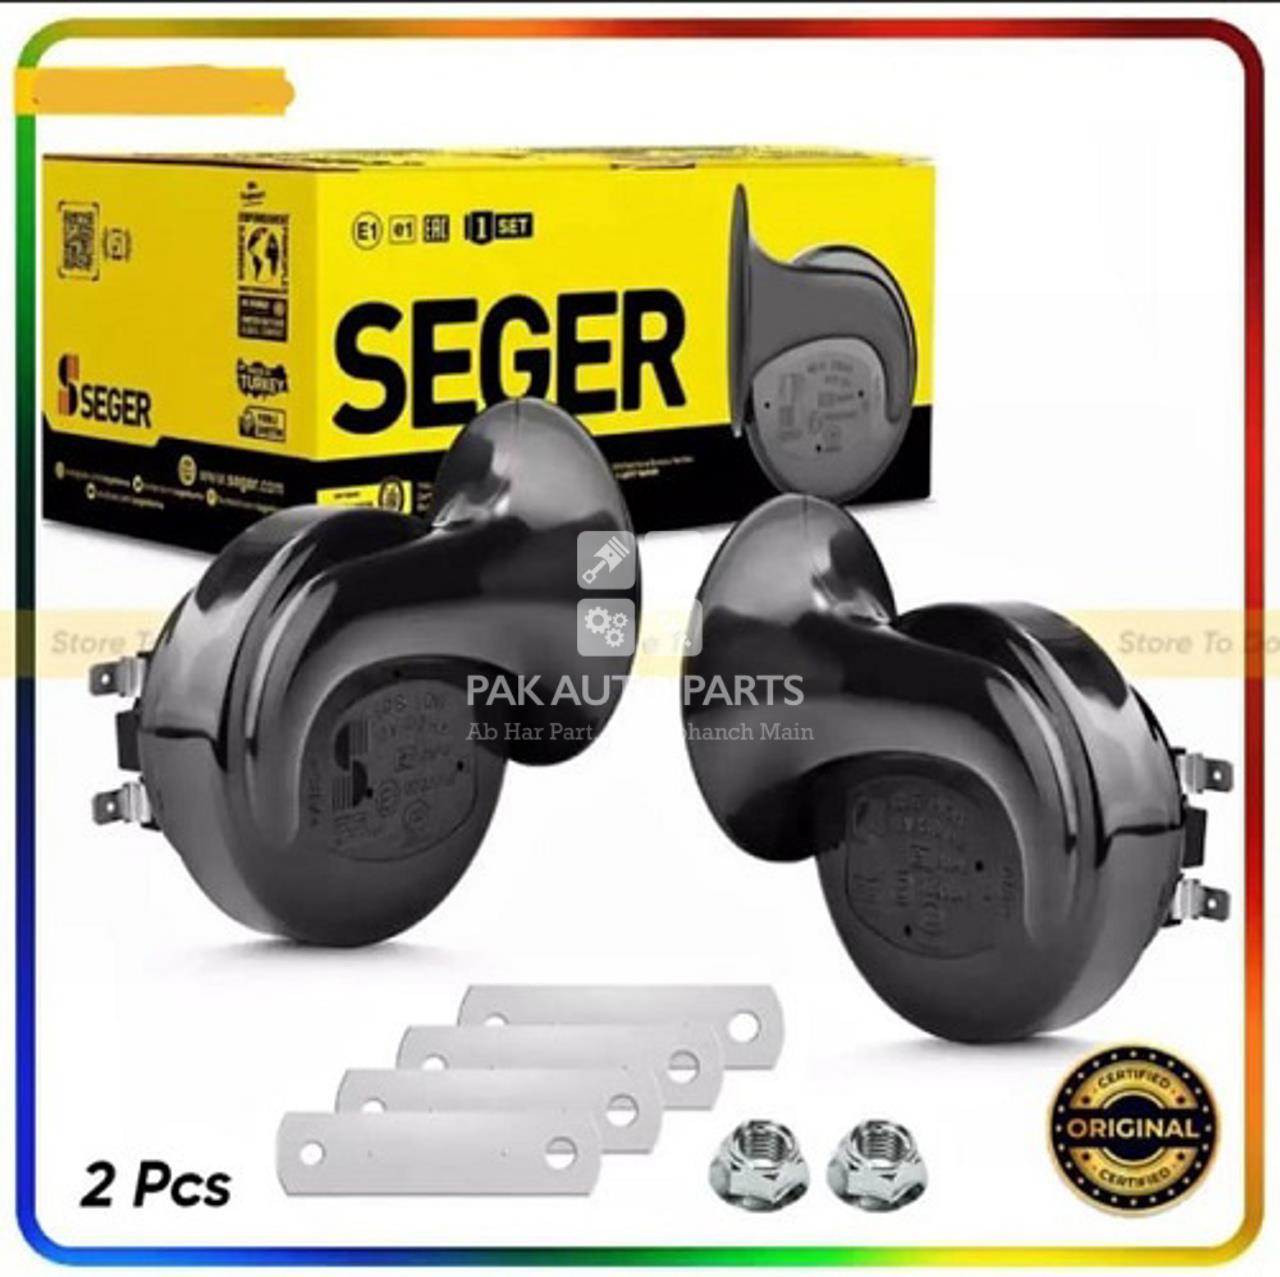 Picture of Seger Snail Horn - 12V | Premium Quality | Extra Loud | Box Packed